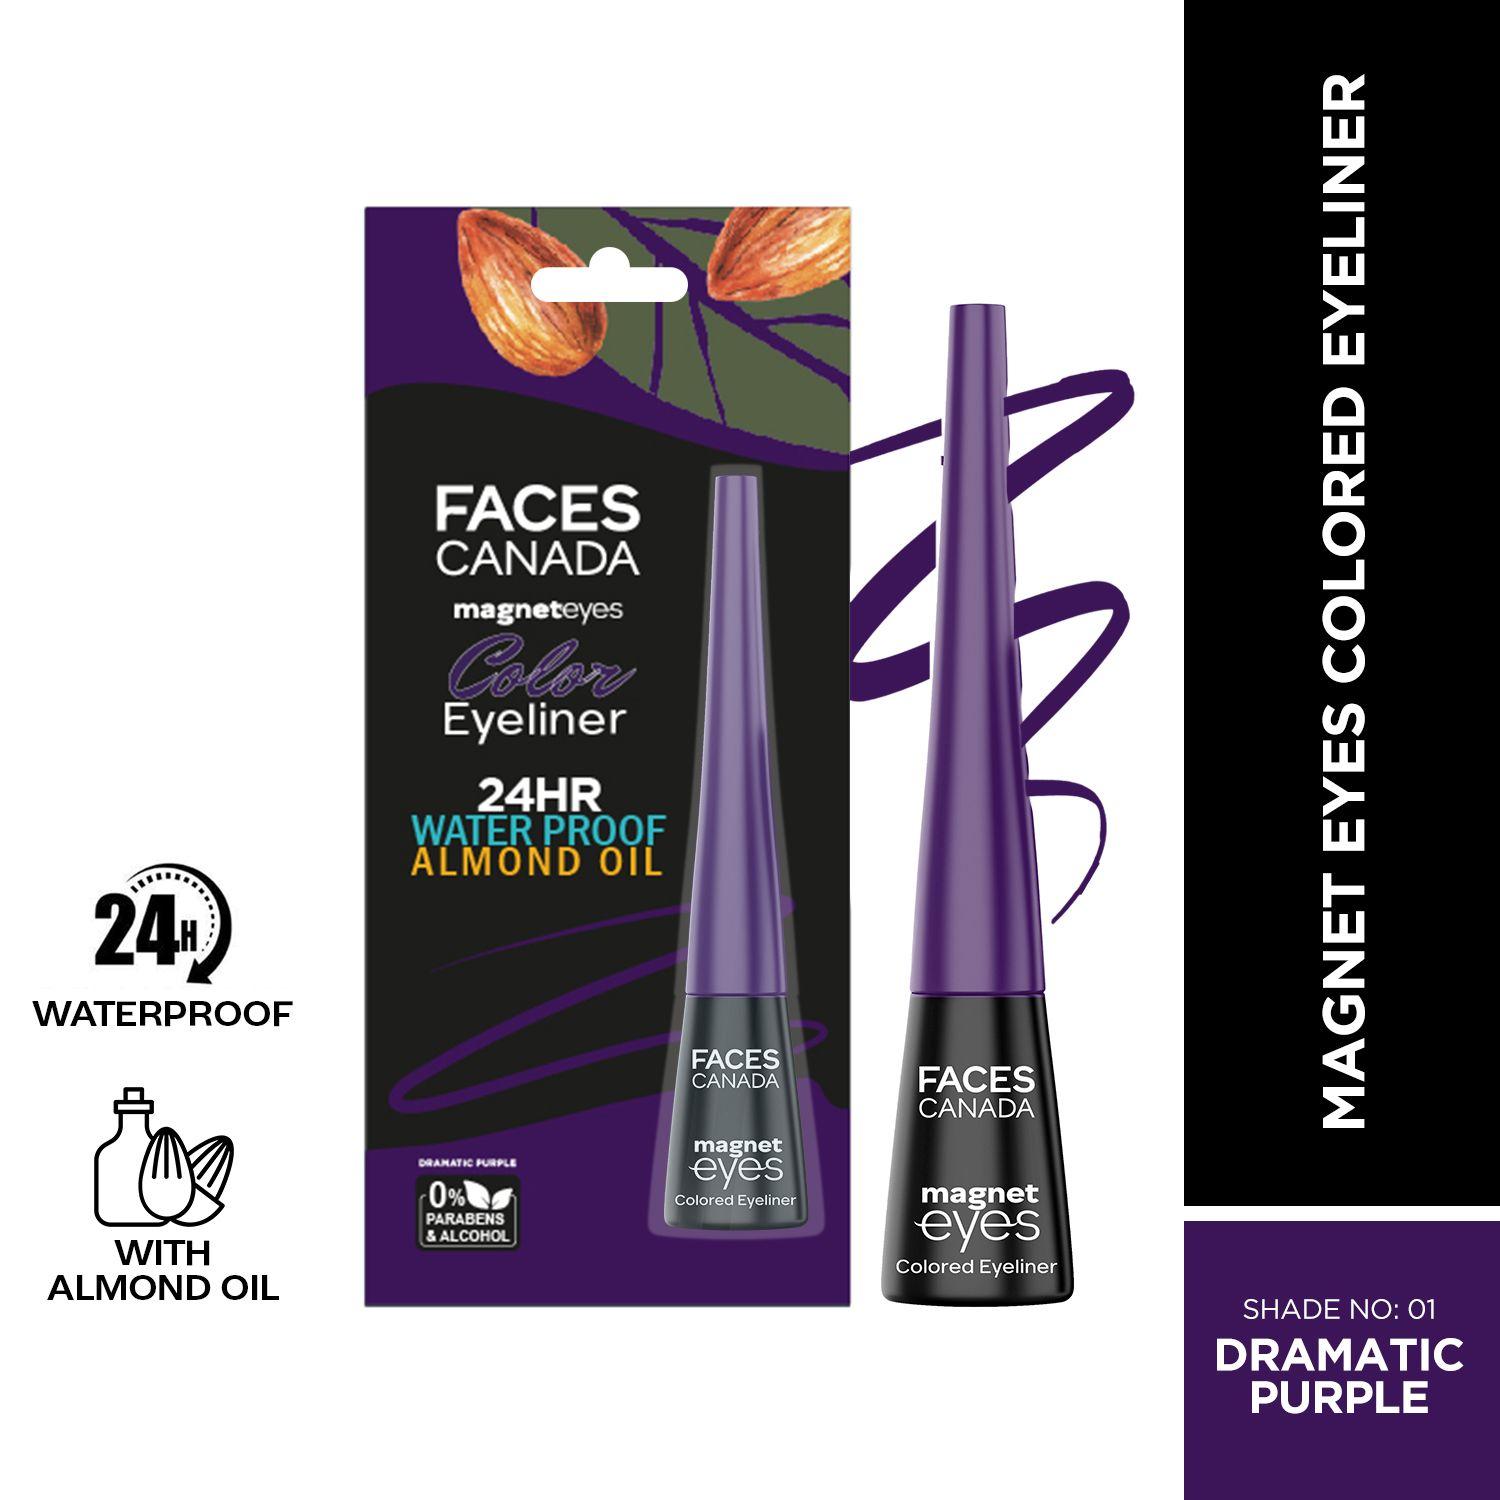 Faces Canada | Faces Canada Magneteyes Color Eyeliner, Glossy Finish, 24HR Long-lasting - Dramatic Purple (4 ml)